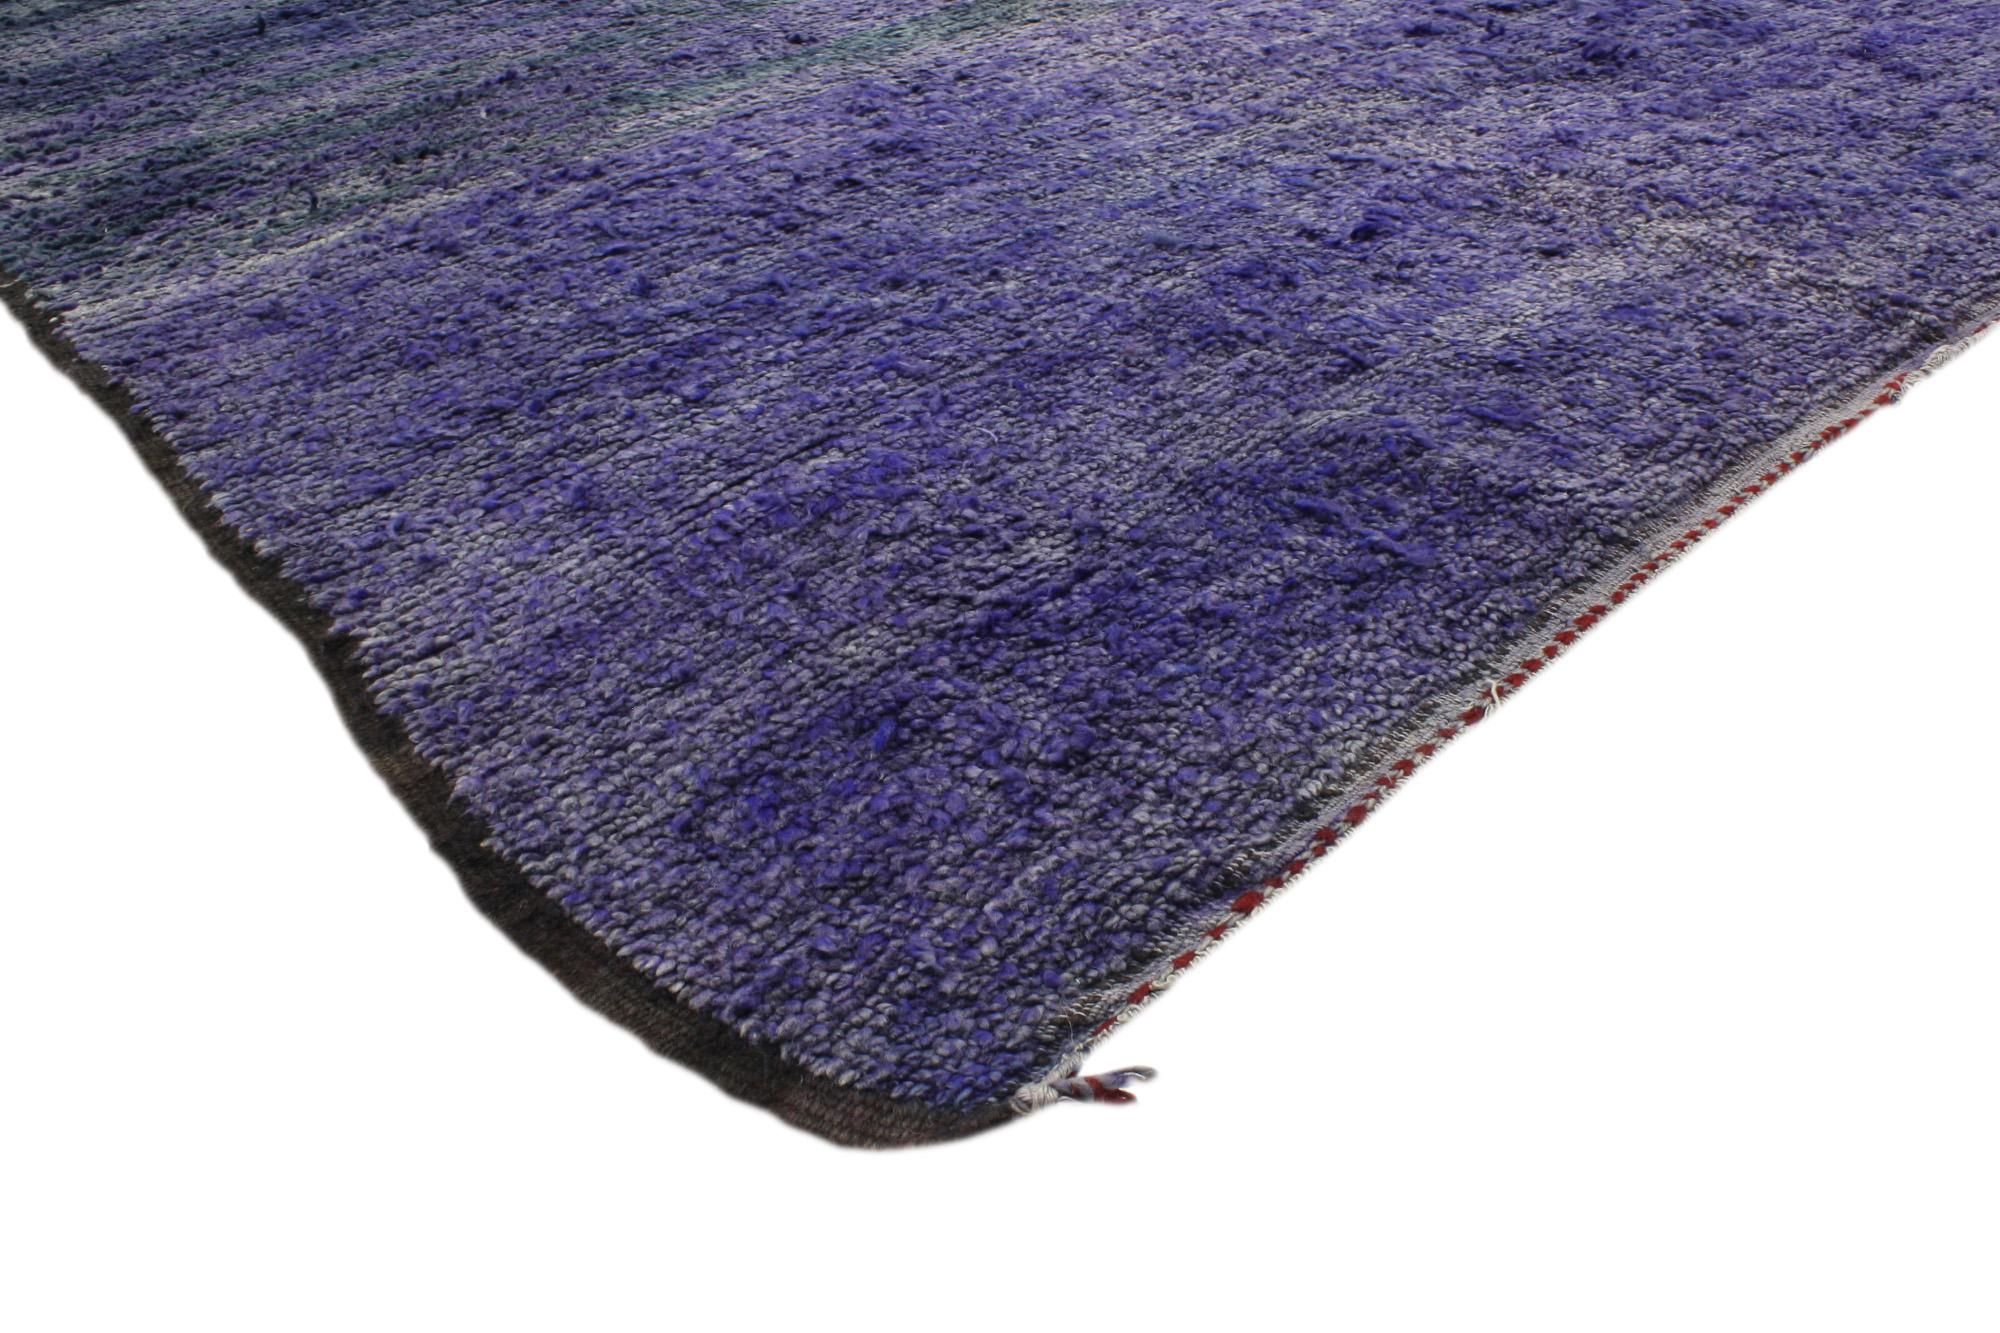 20345 Vintage Purple Beni Mrirt Moroccan Rug, 07'01 x 14'00. Beni Mrirt rugs epitomize the revered tradition of Moroccan weaving, renowned for their sumptuous texture, geometric patterns, and tranquil earthy tones. Handcrafted by skilled artisans of